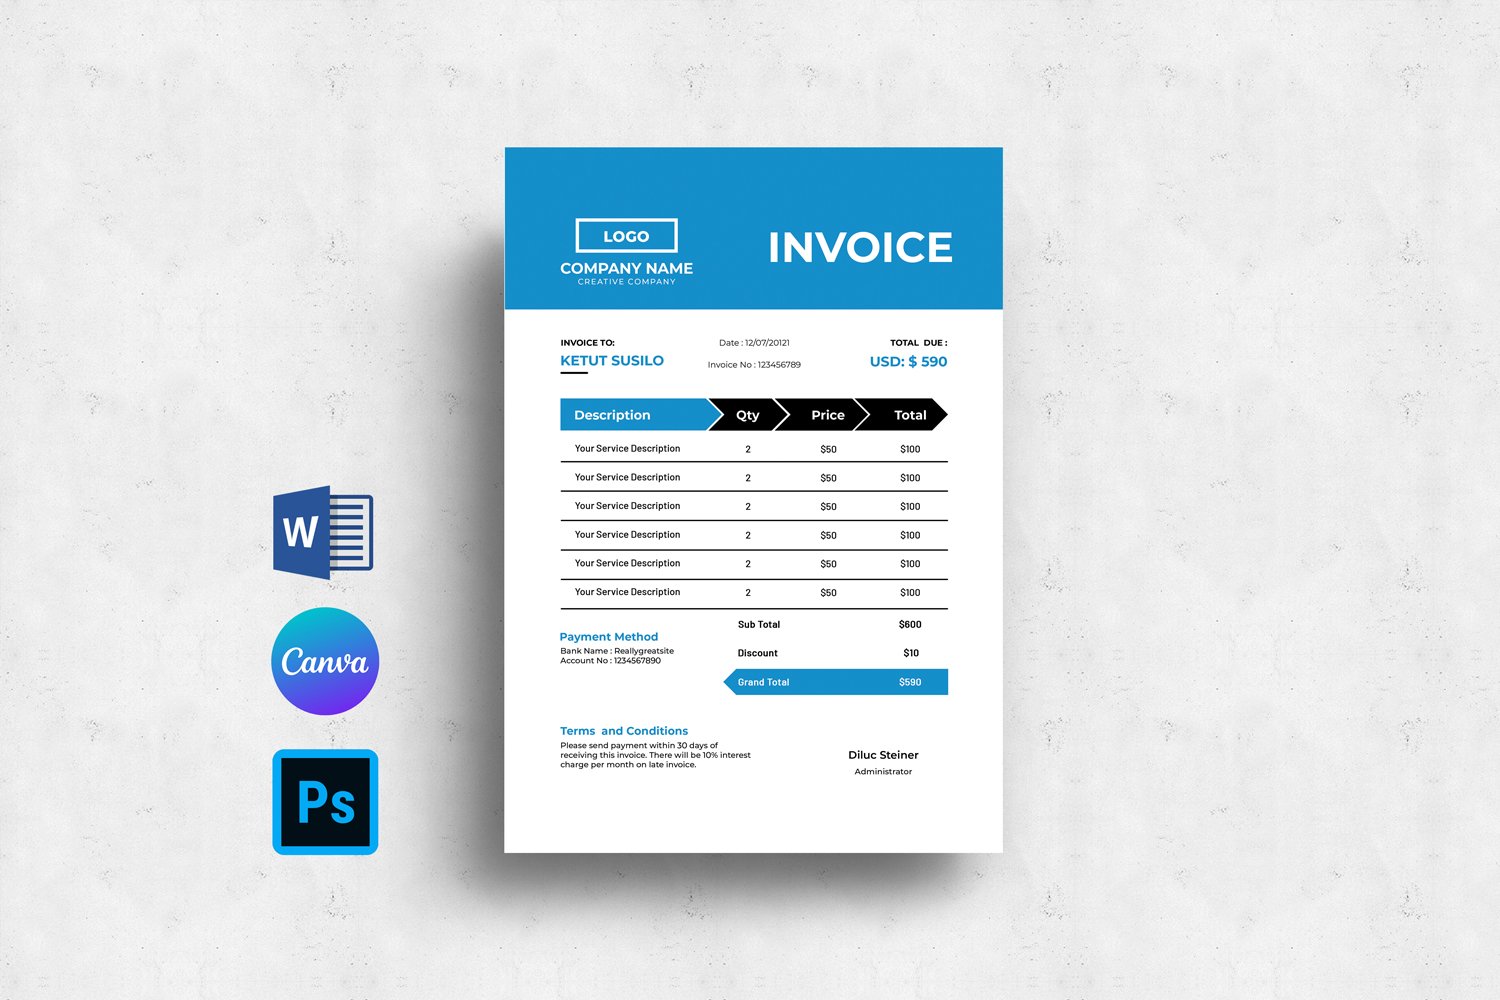 Minimal Invoice Template. Psd, Word and Canva